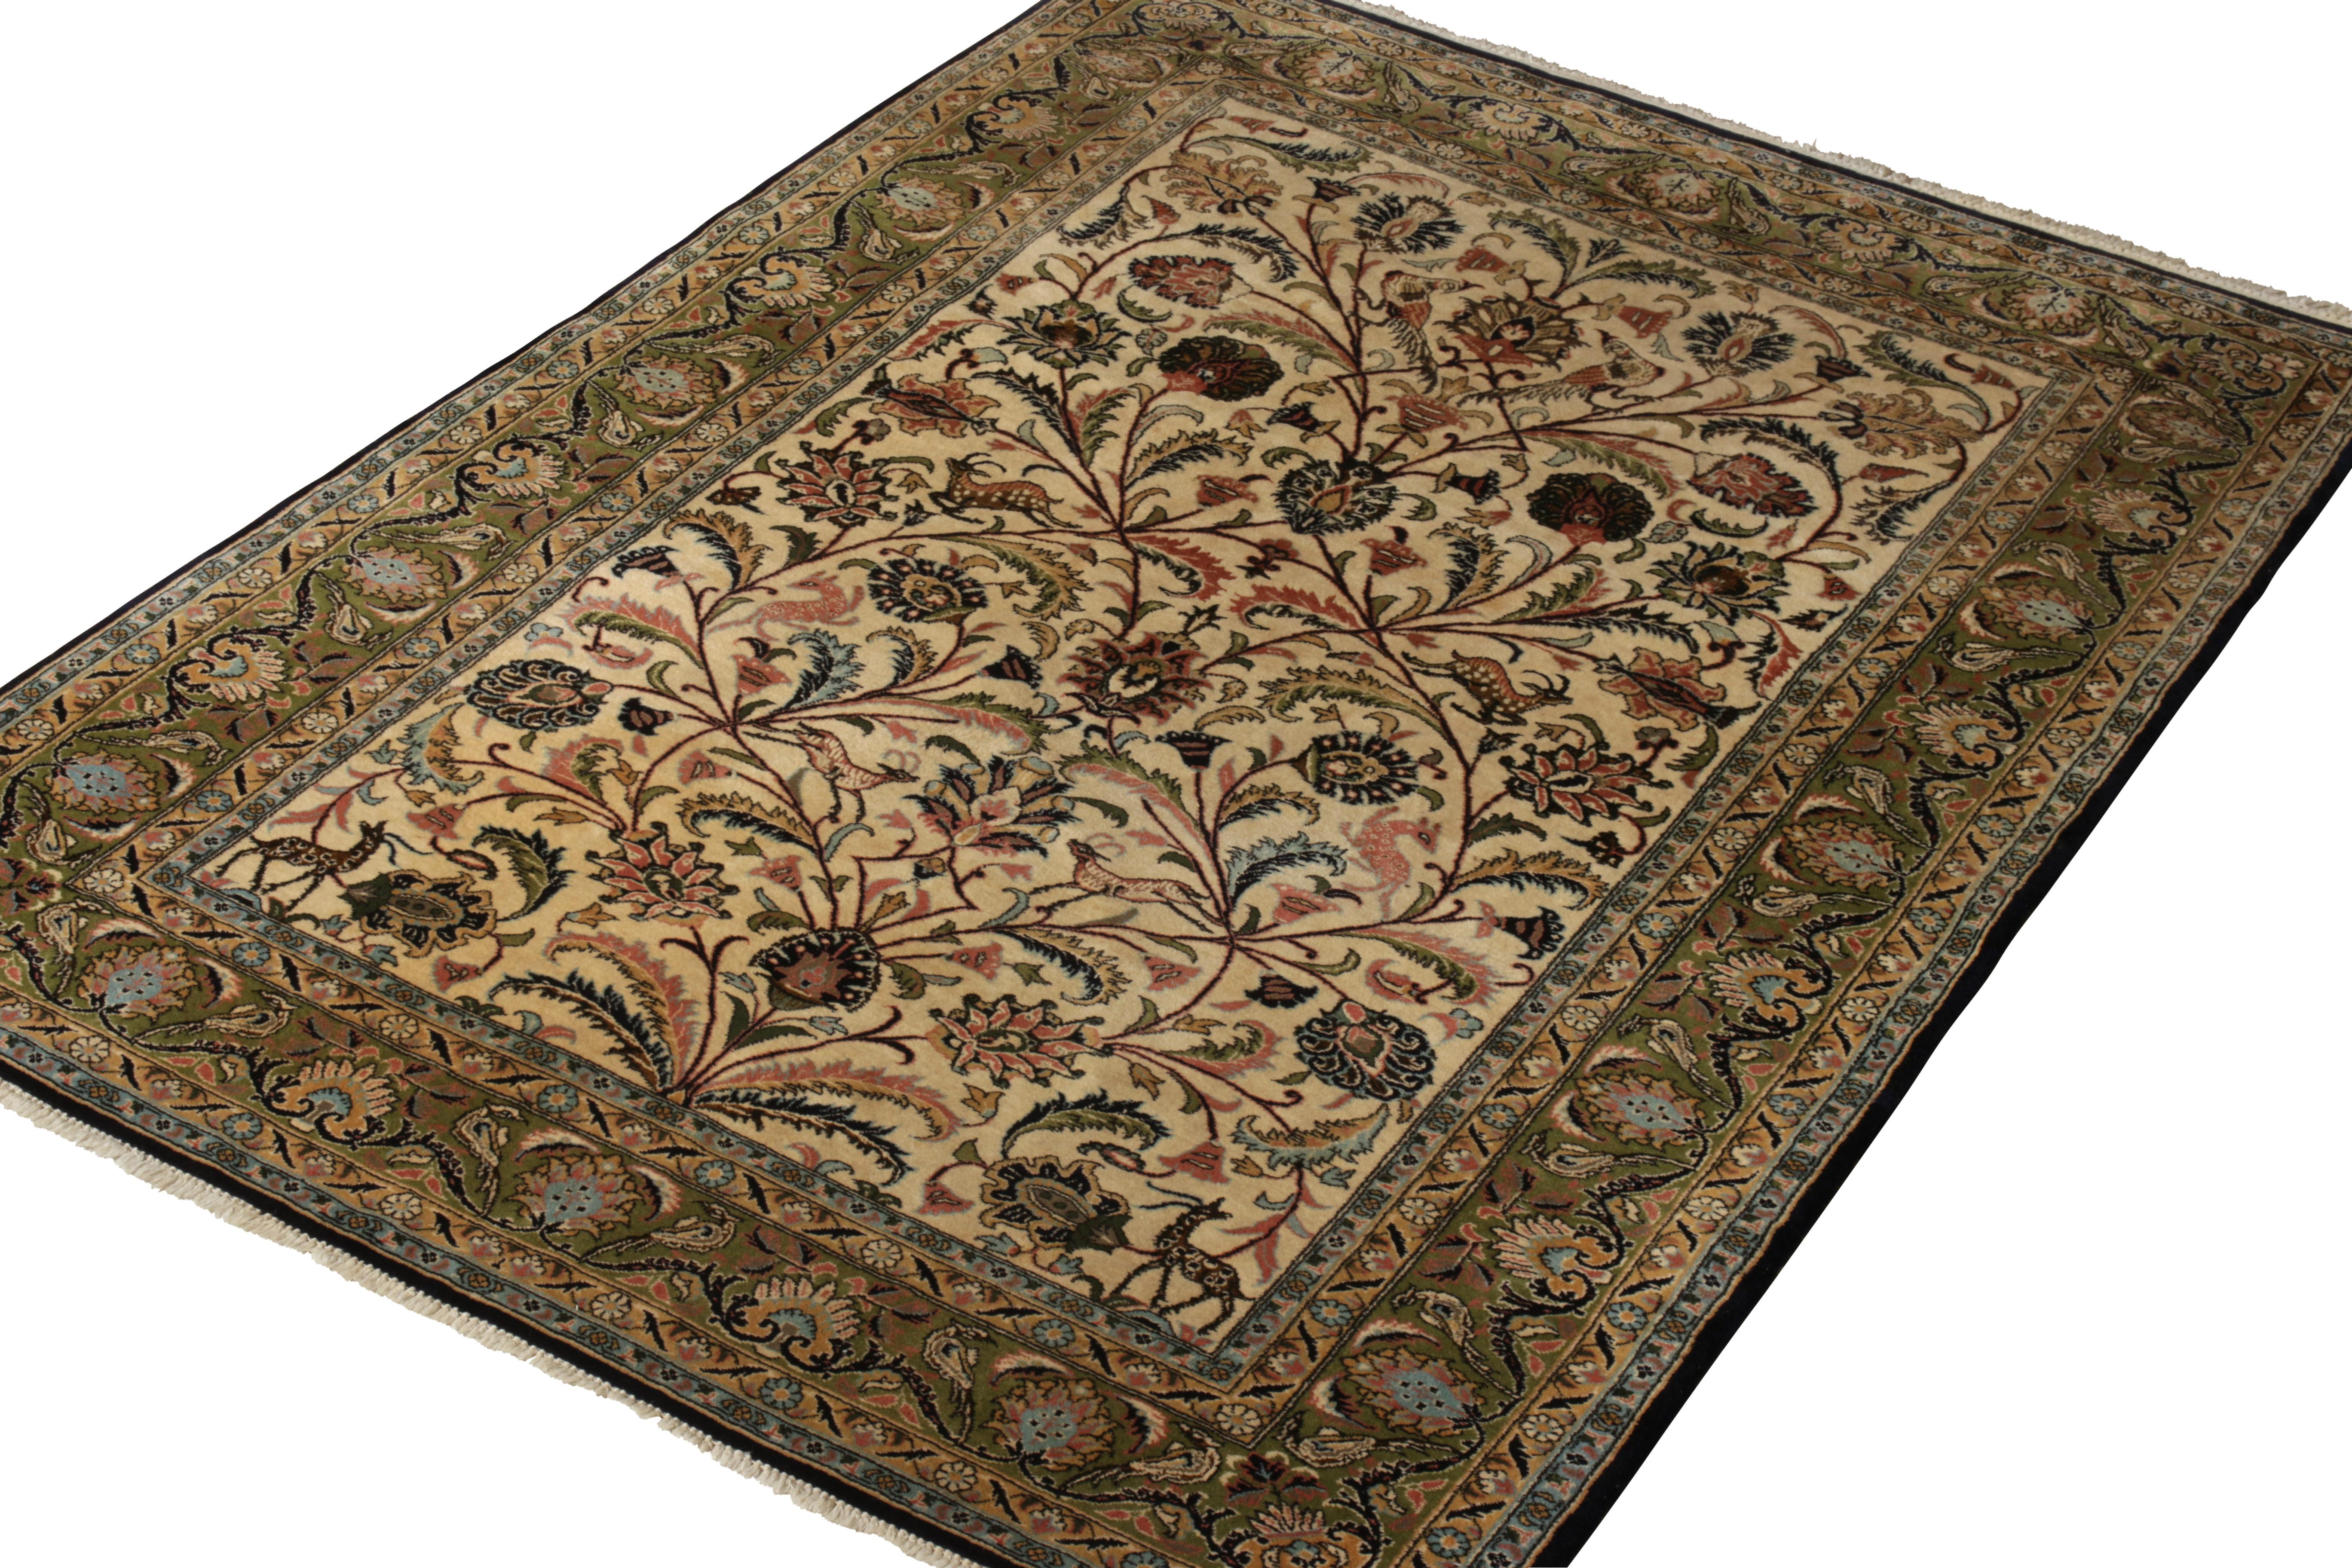 Hand-Knotted Vintage Qum Persian Rug, Beige-Brown & Green Floral by Rug & Kilim In Good Condition For Sale In Long Island City, NY